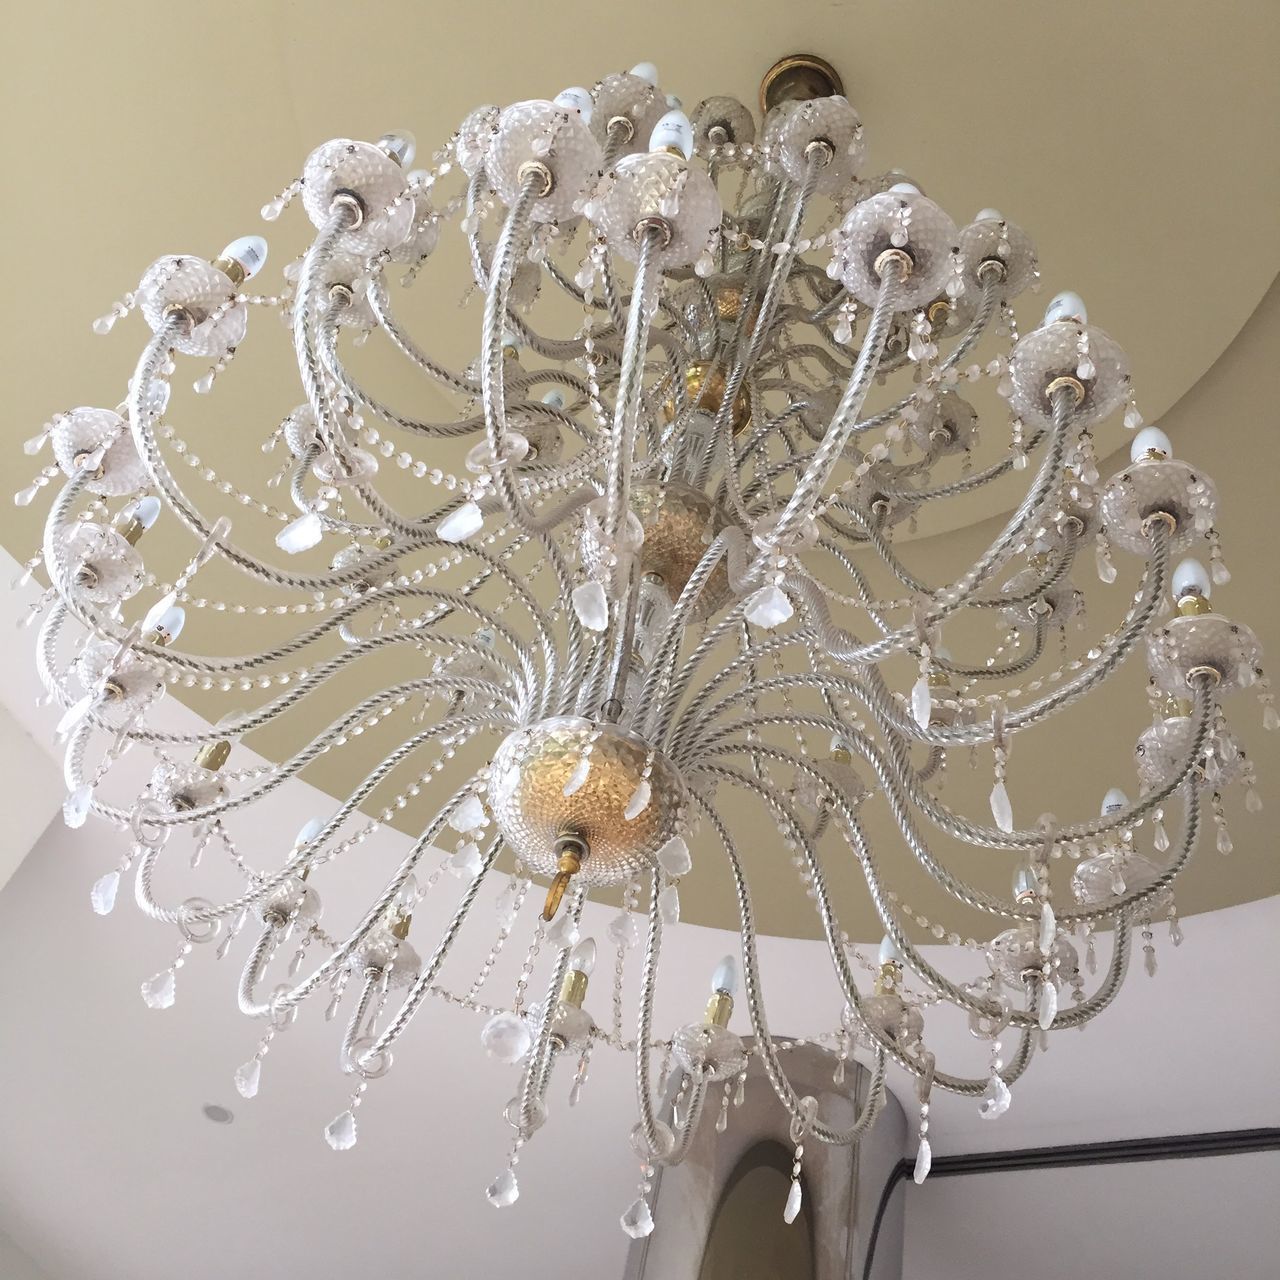 CLOSE-UP OF CHANDELIER ON TABLE